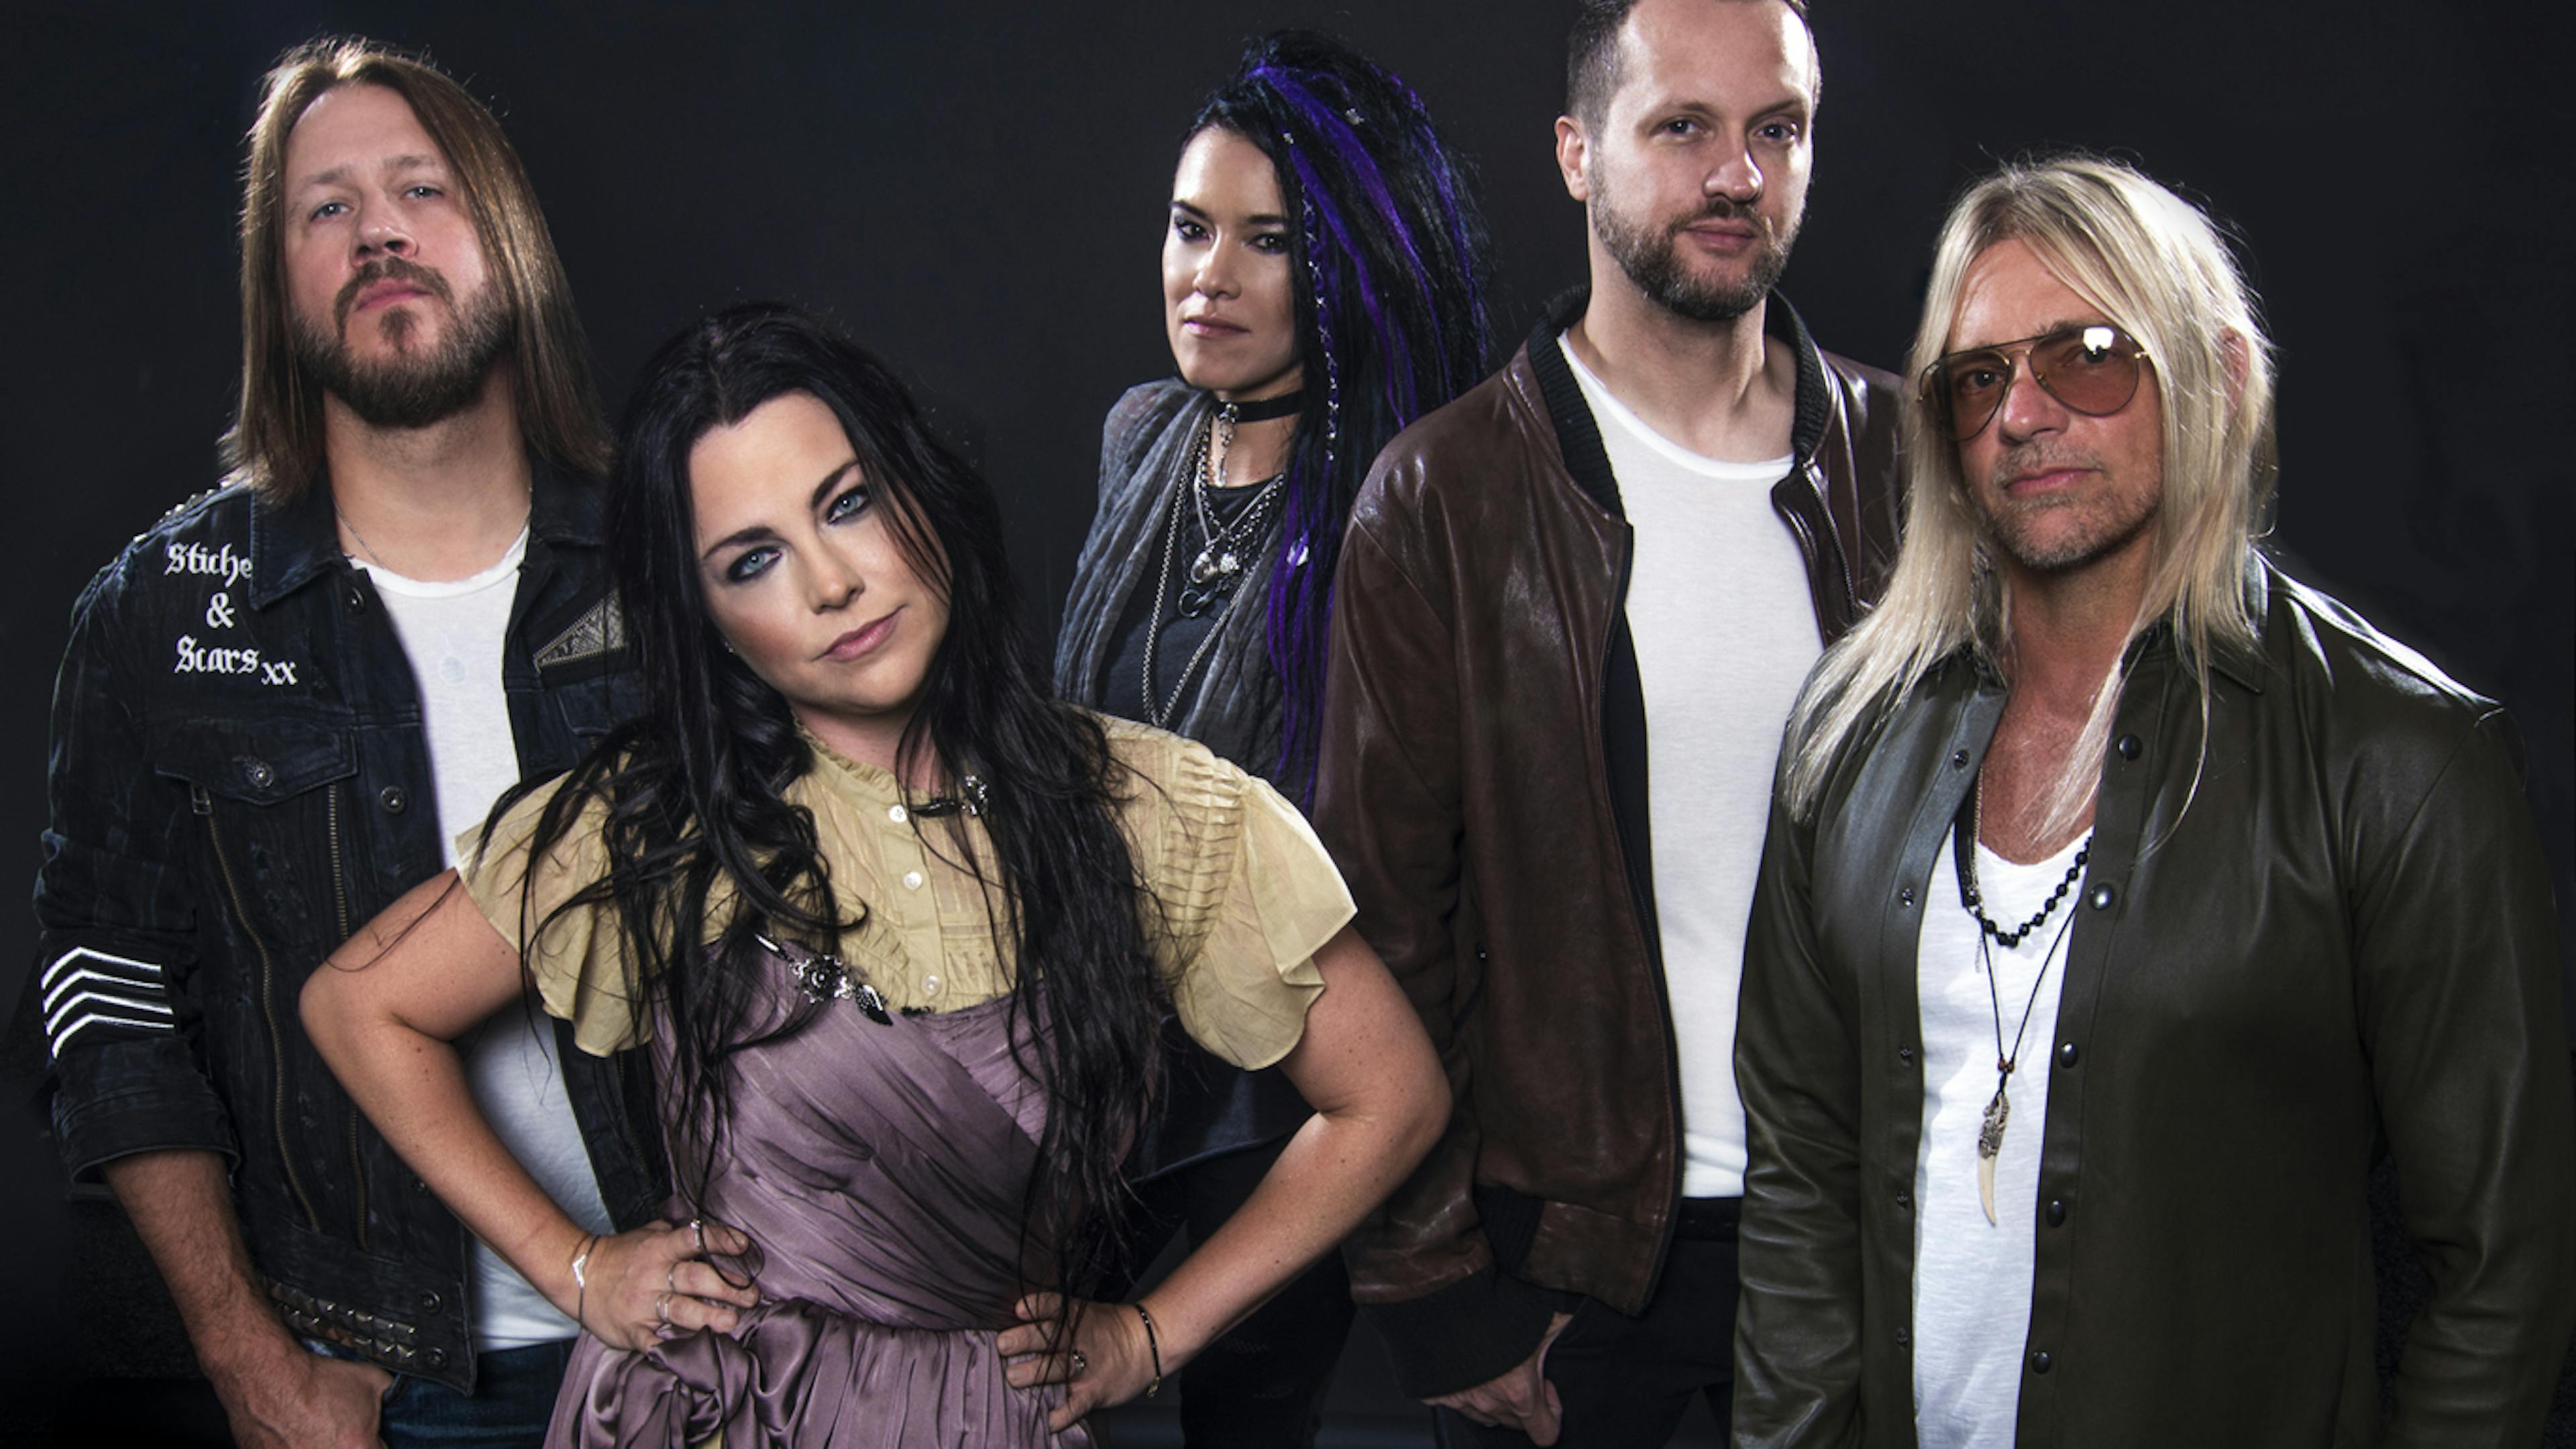 Evanescence And Within Temptation Announce 2020 UK And European Tour